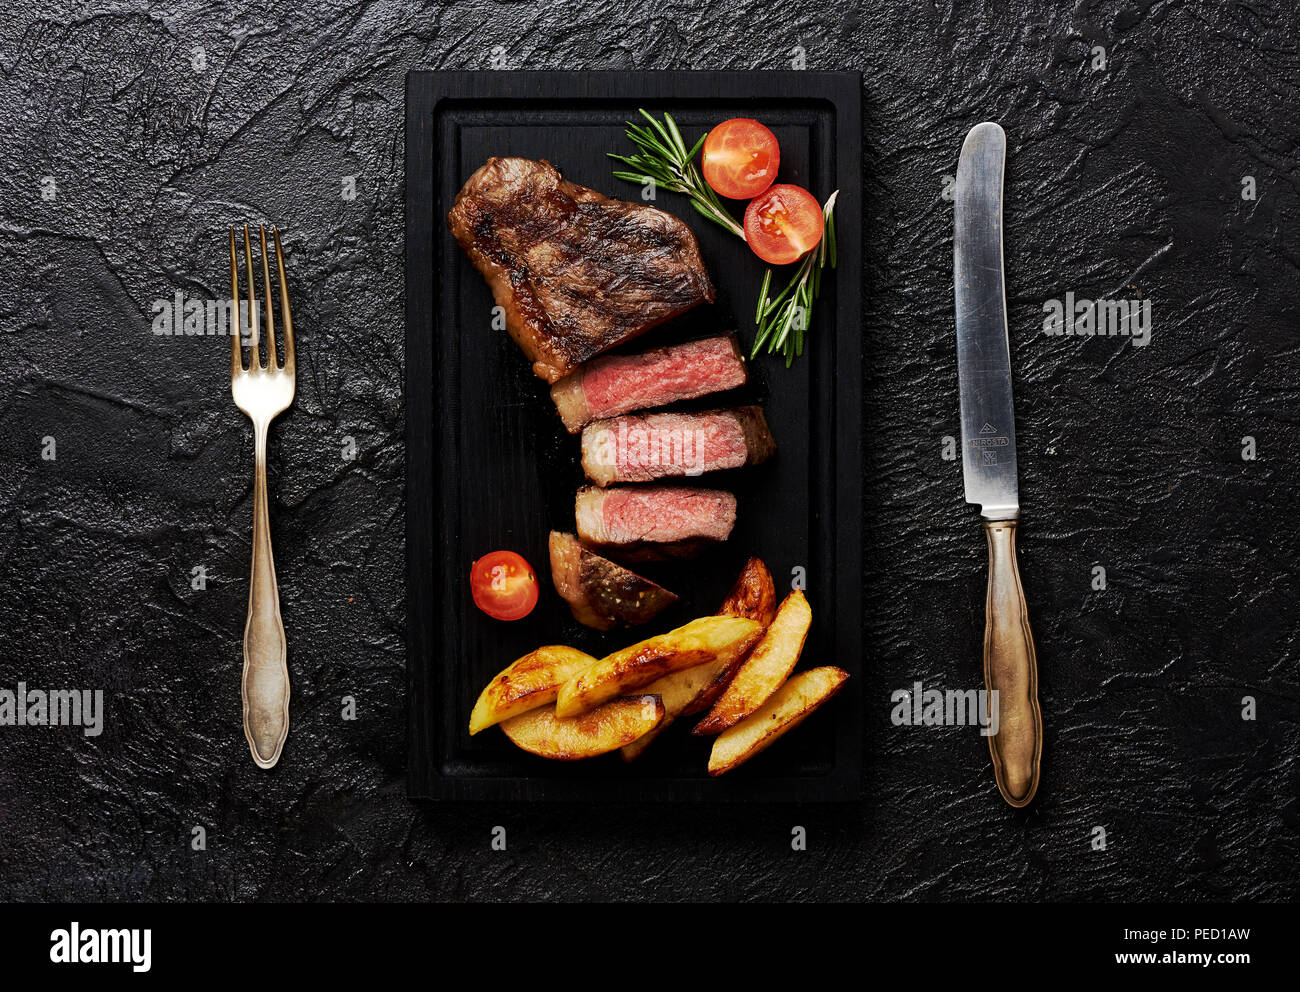 Meat Picanha steak, traditional Brazilian cut with tomatoes, potato wedges and rosemary on black meat cutting board. Steak with fork and knife. Black concrete background. Stock Photo